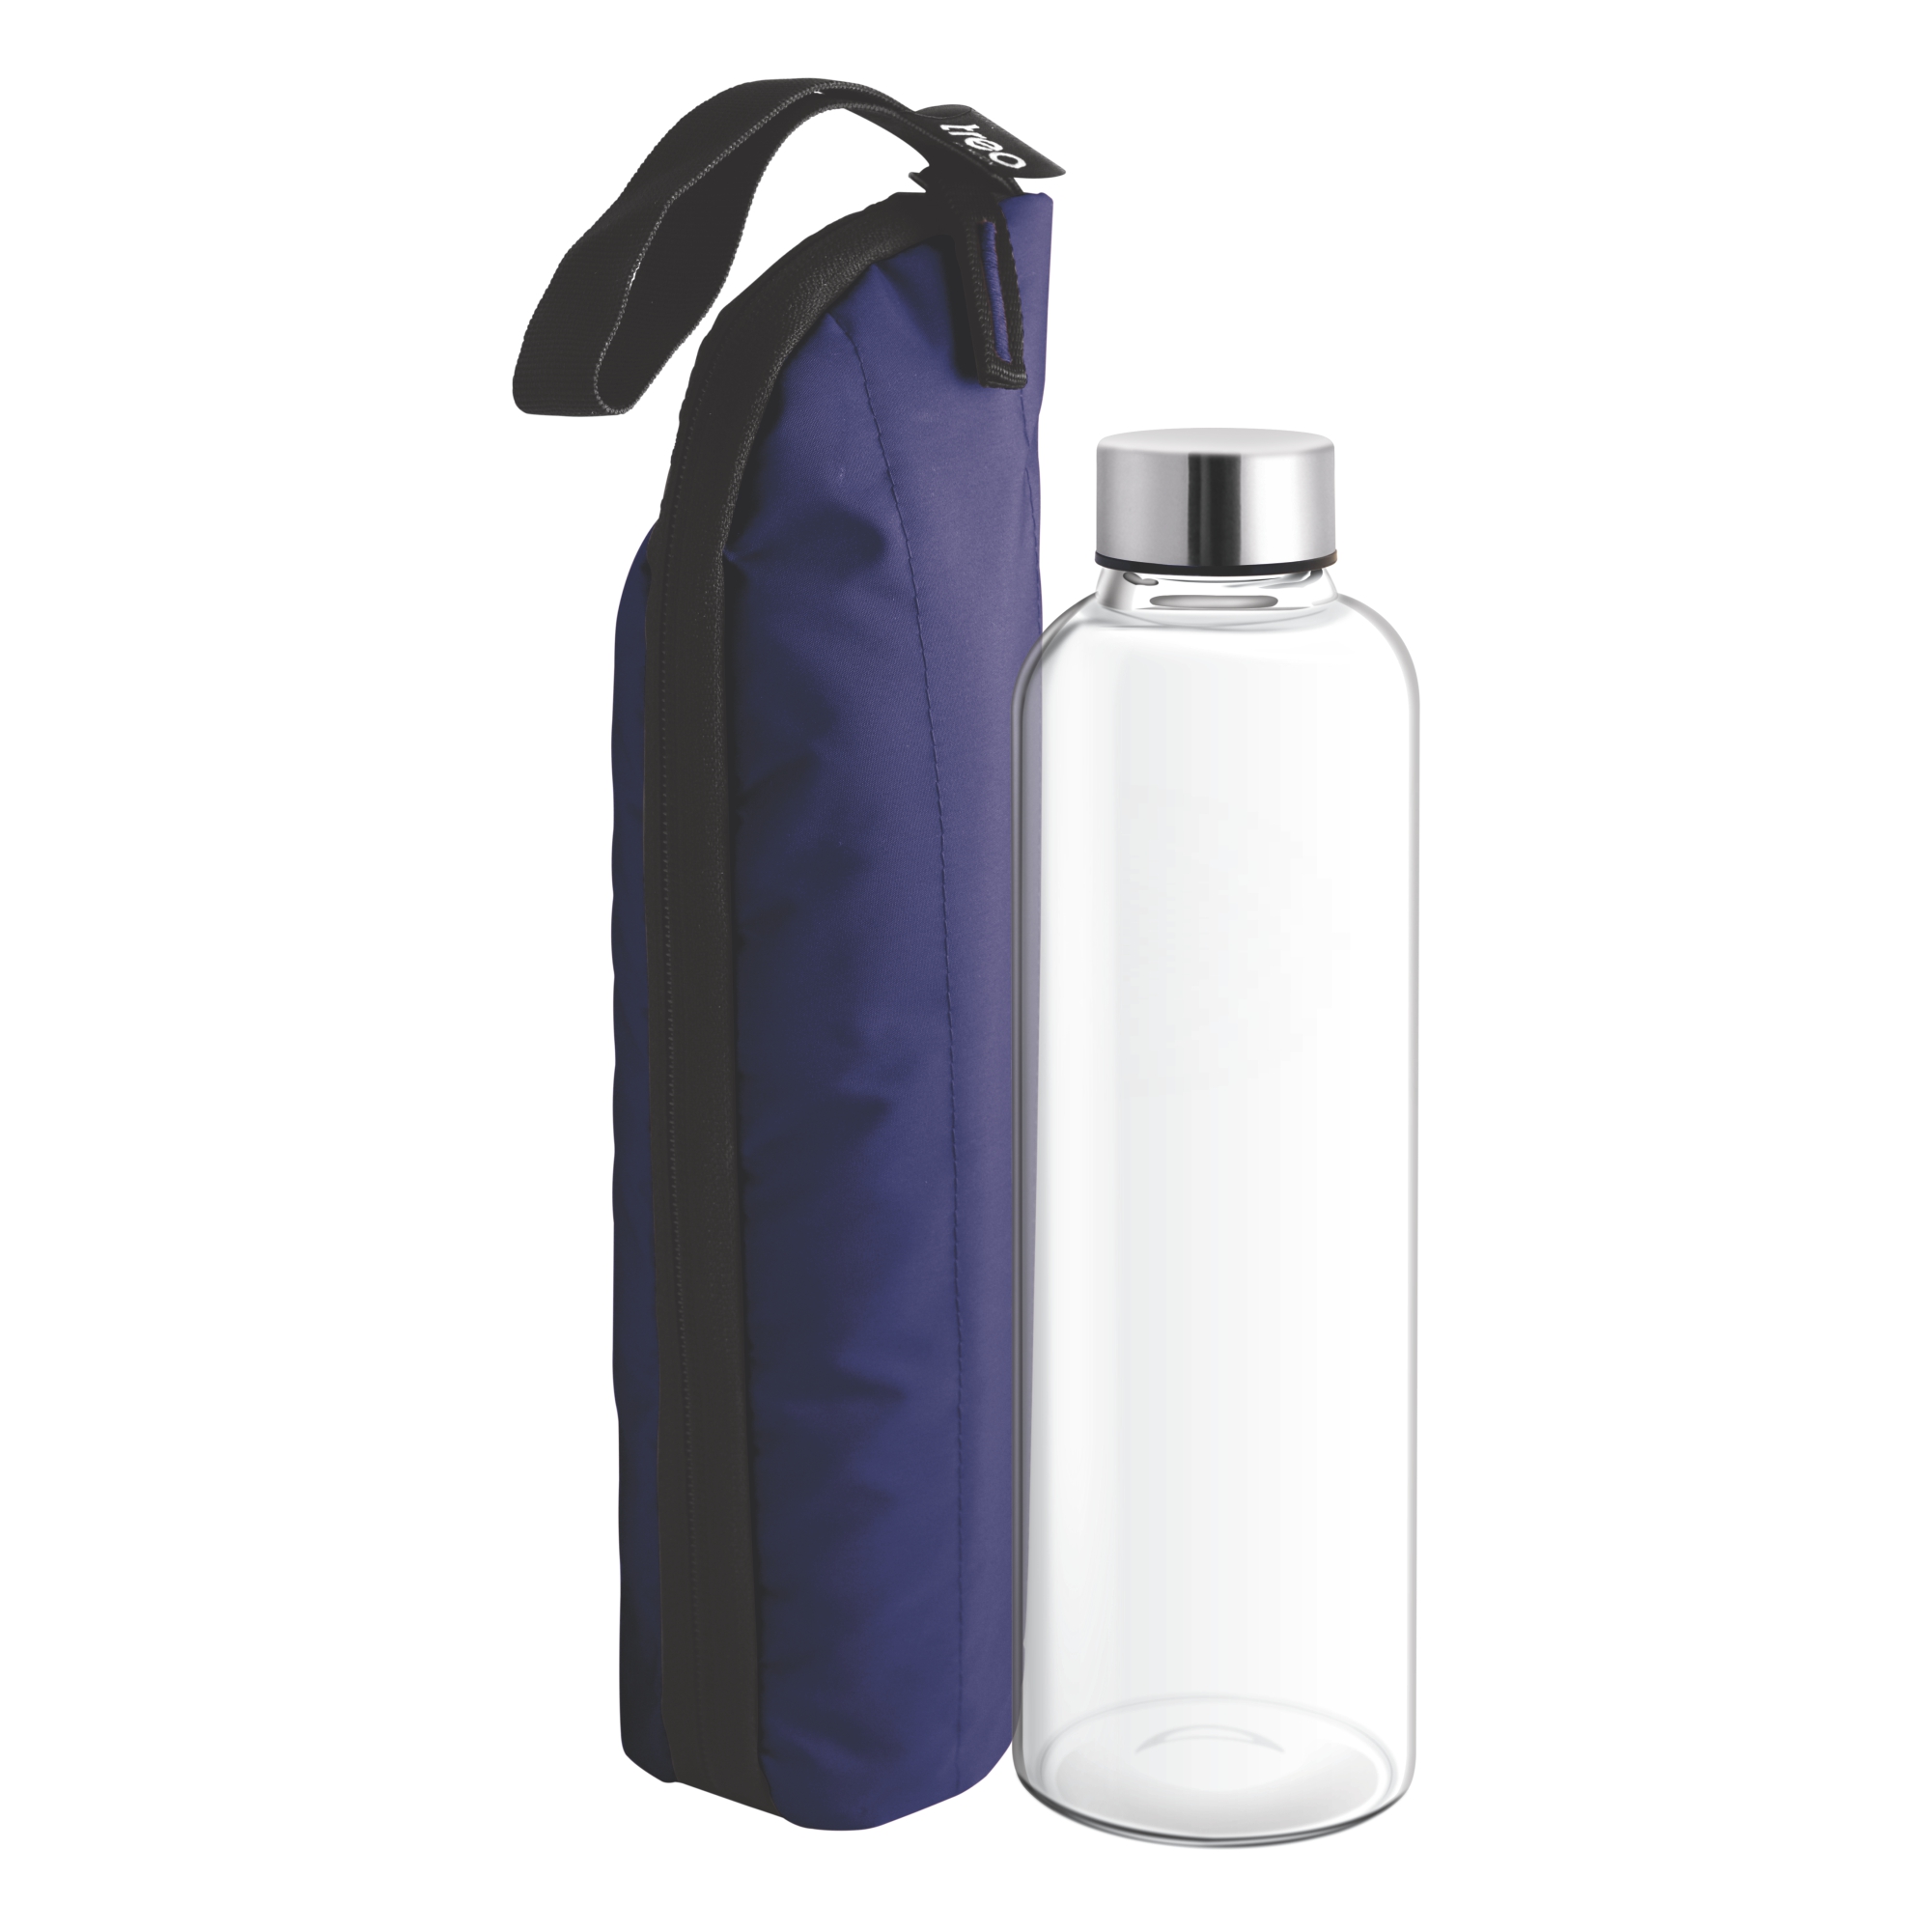 Treo Swag Borosilicate Glass Bottle With Protective Case